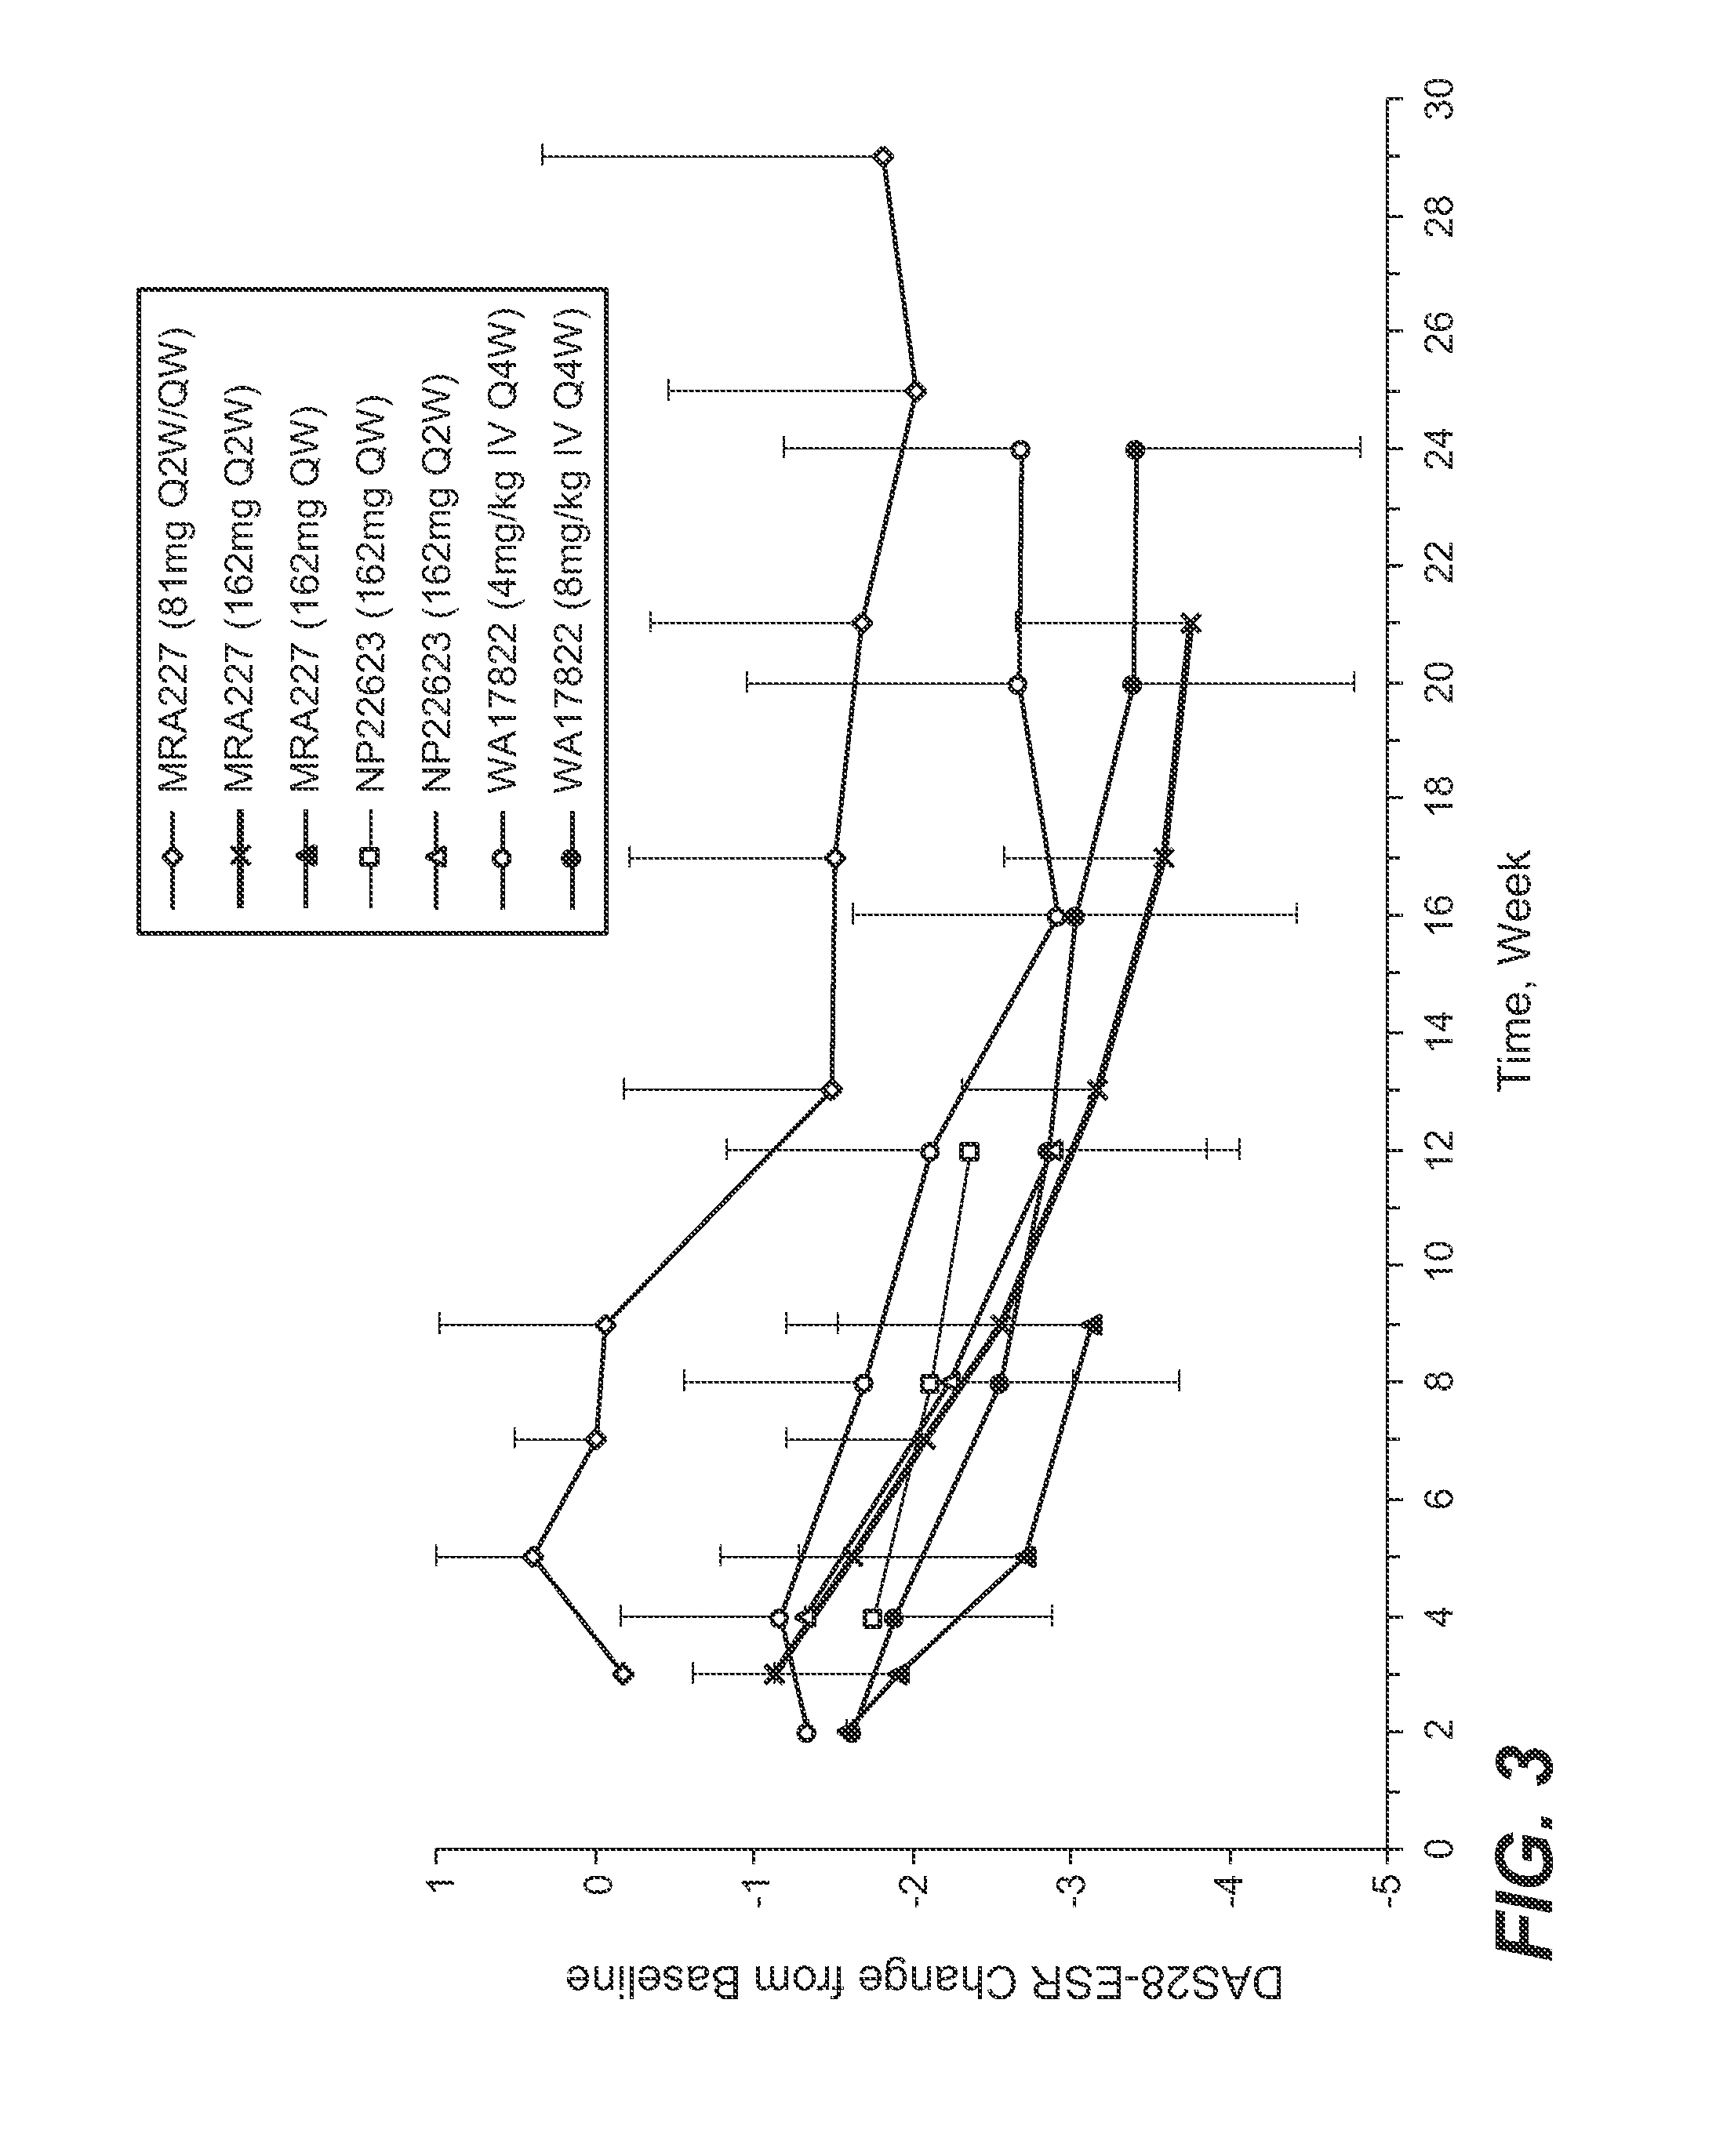 Subcutaneously administered Anti-il-6 receptor antibody